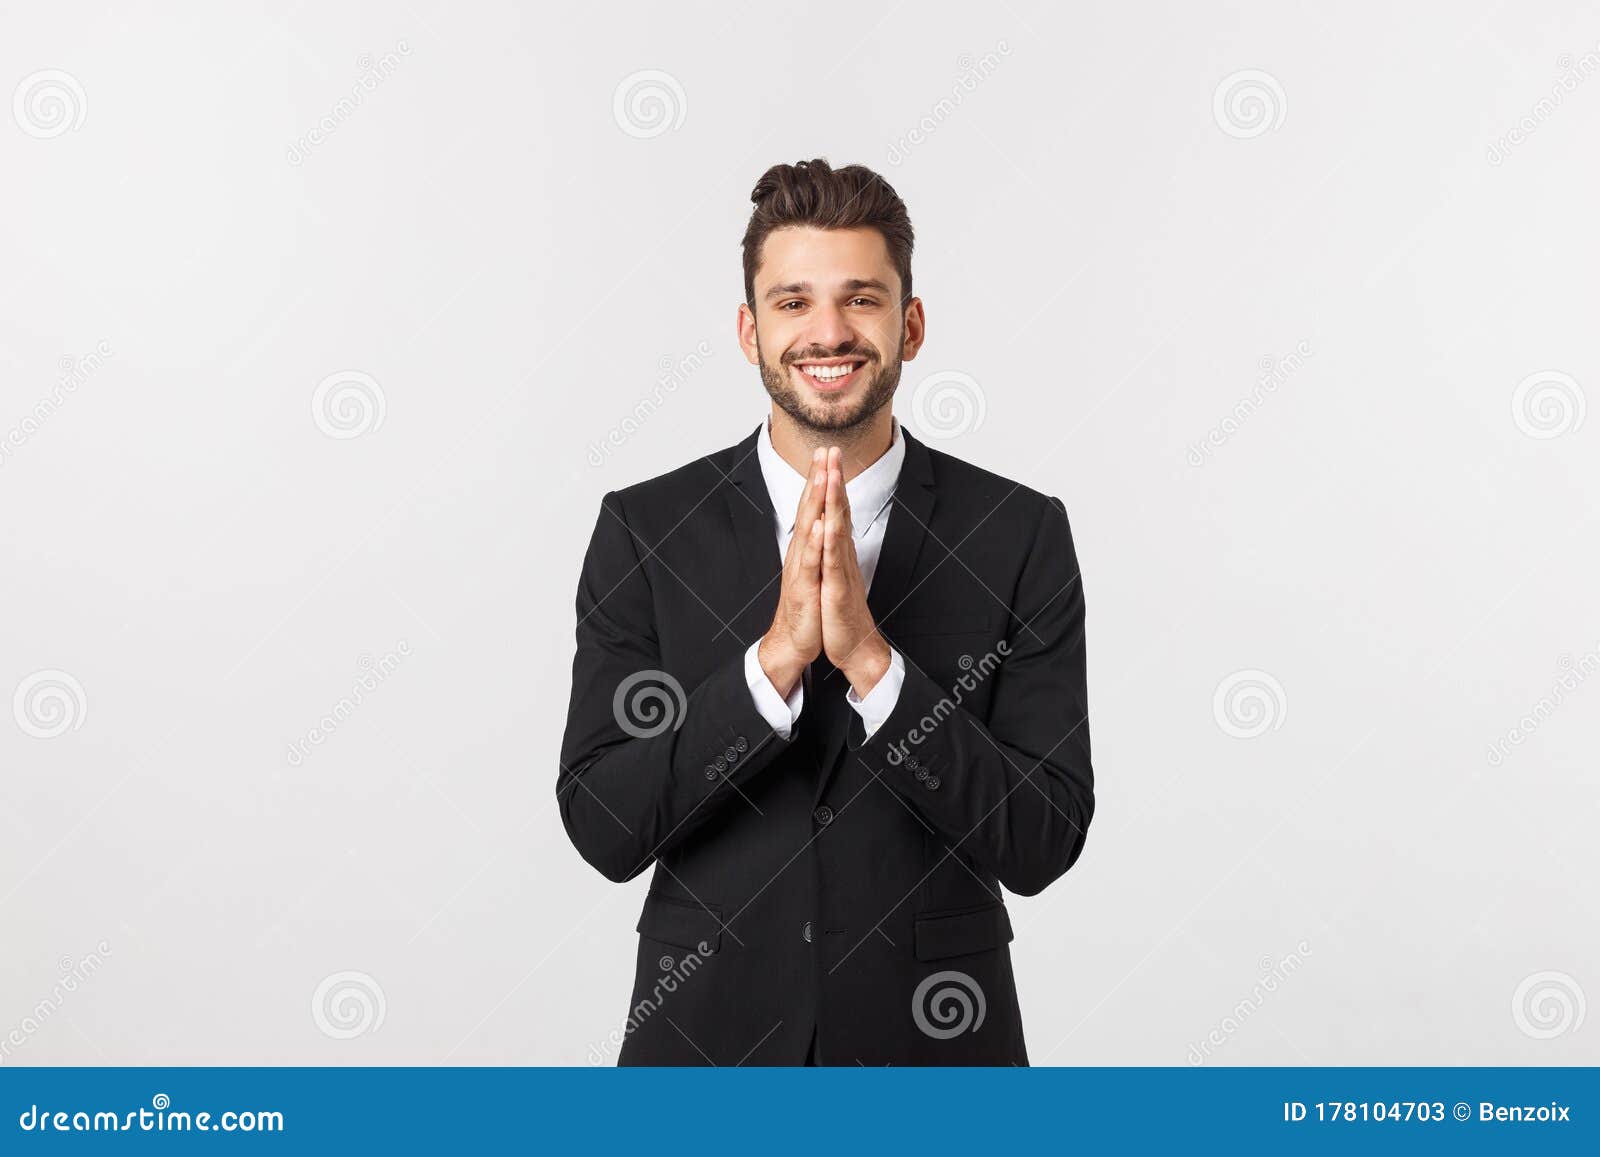 Handsome Young Business Man Standing Praying, Isolated Over White ...